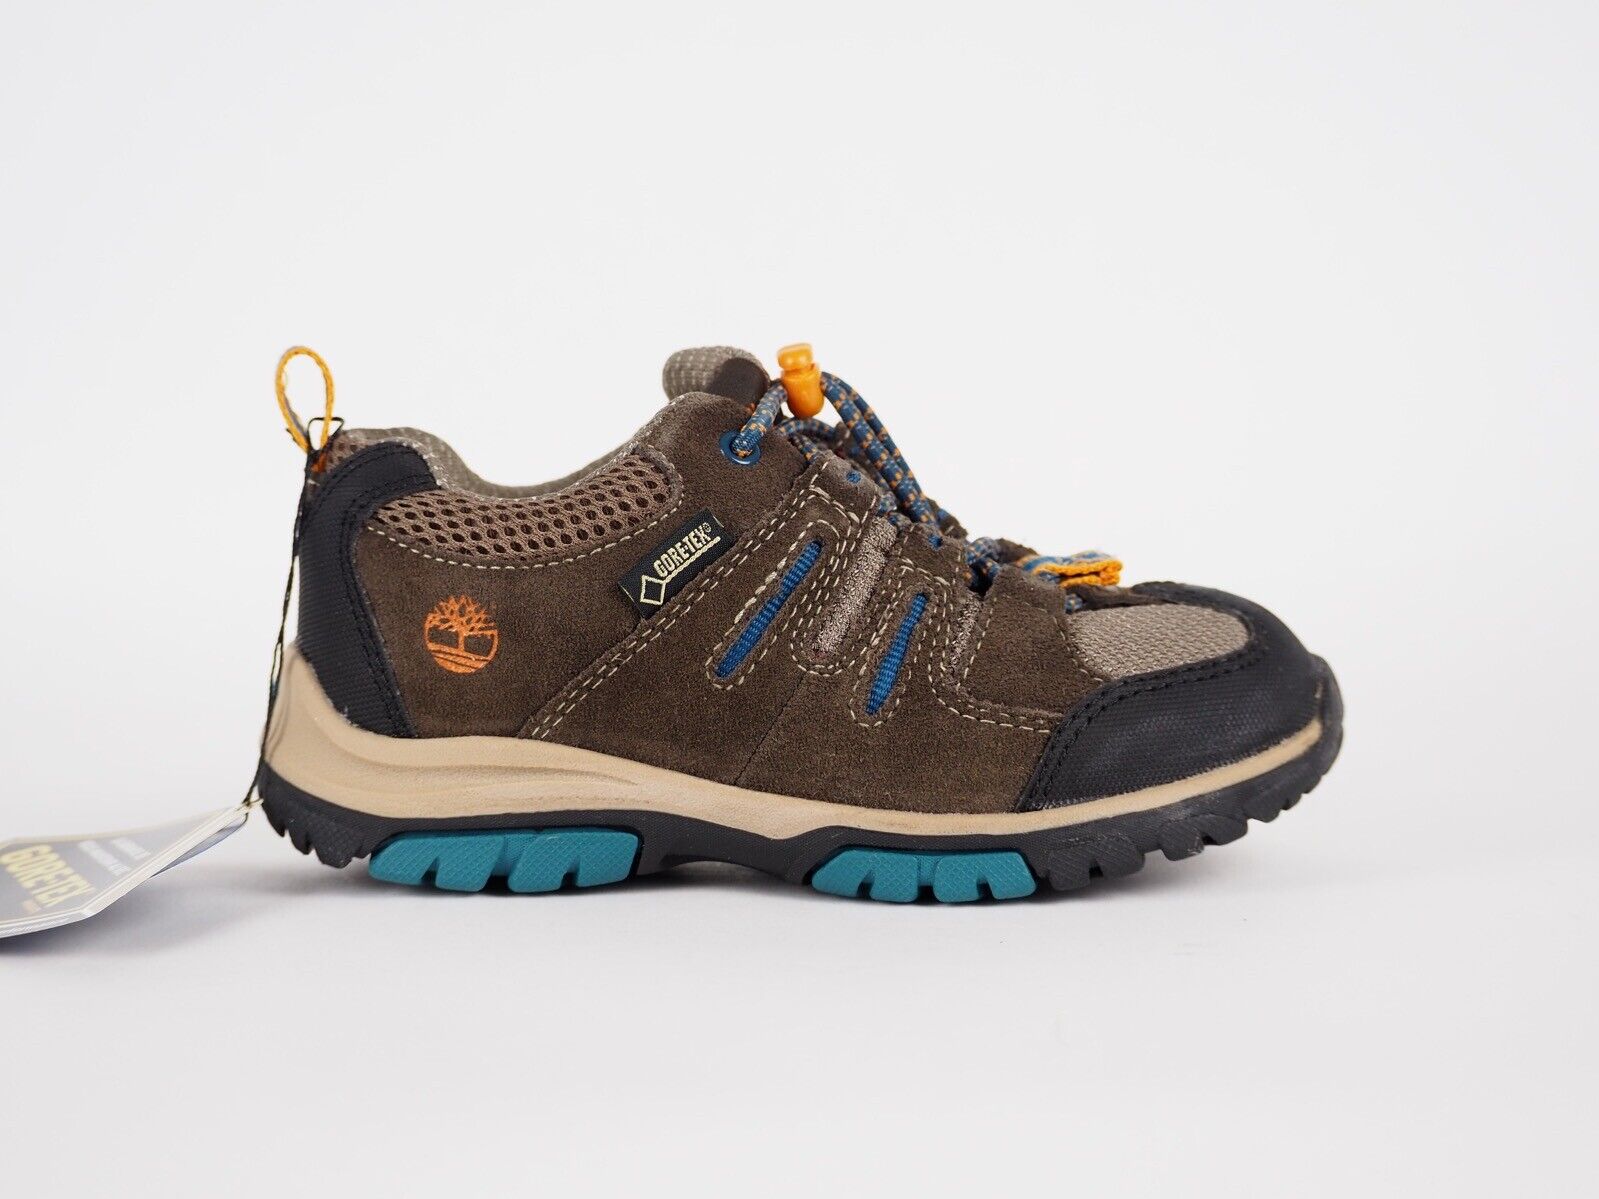 Infants Timberland Zip Trail A1497 Dark Brown Leather Hiker Lace Up Baby Shoes - London Top Style